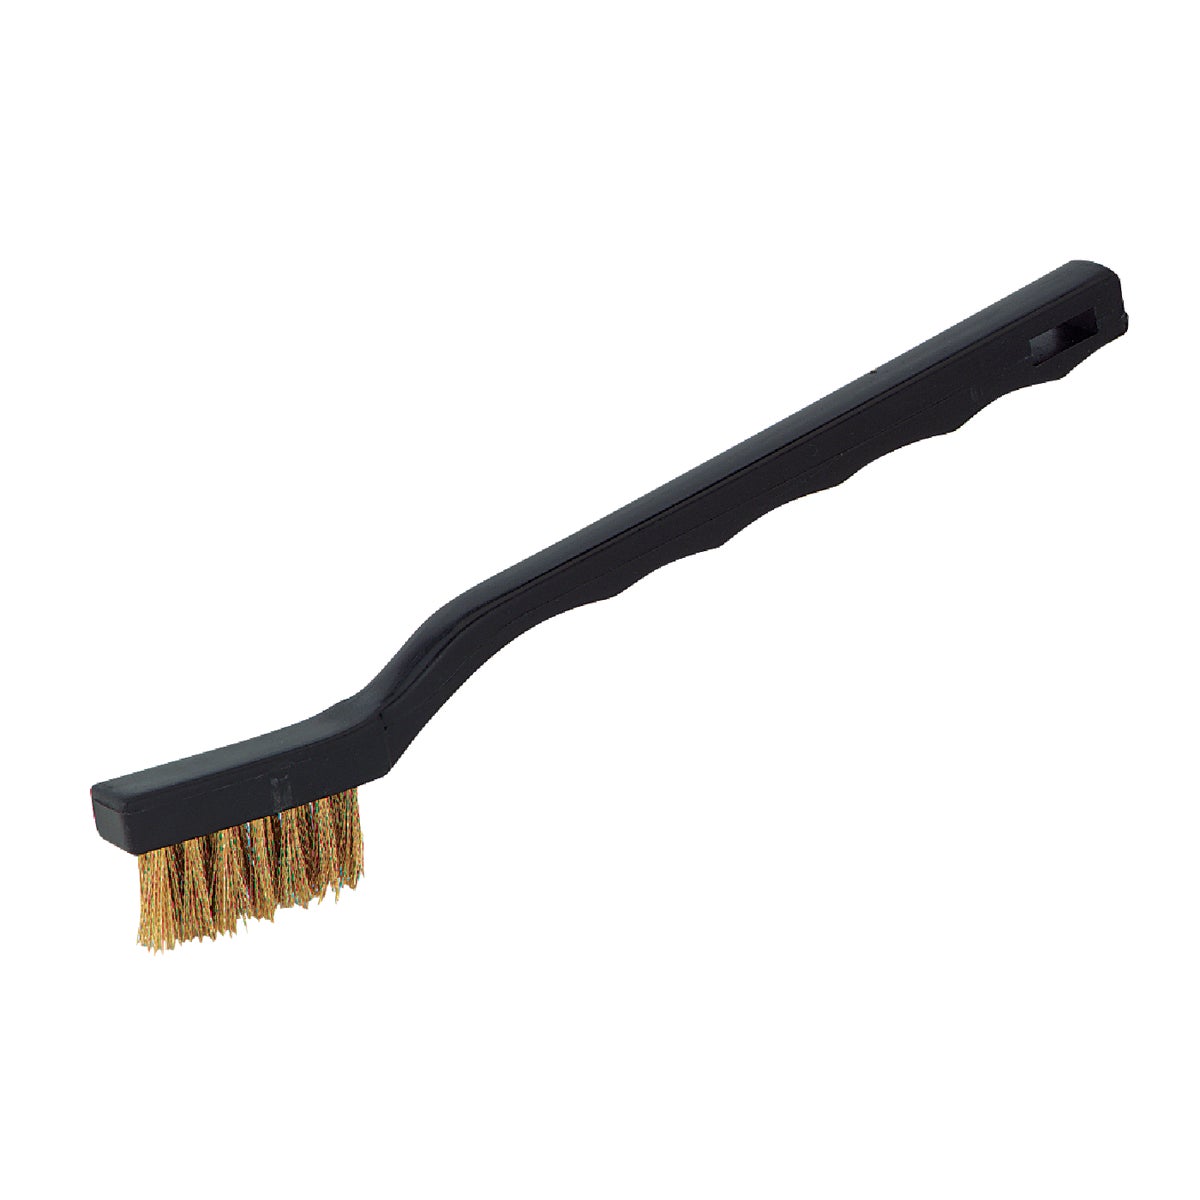 Item 782654, Non-spark brass brush removes rust, scale, and dirt without scratching 